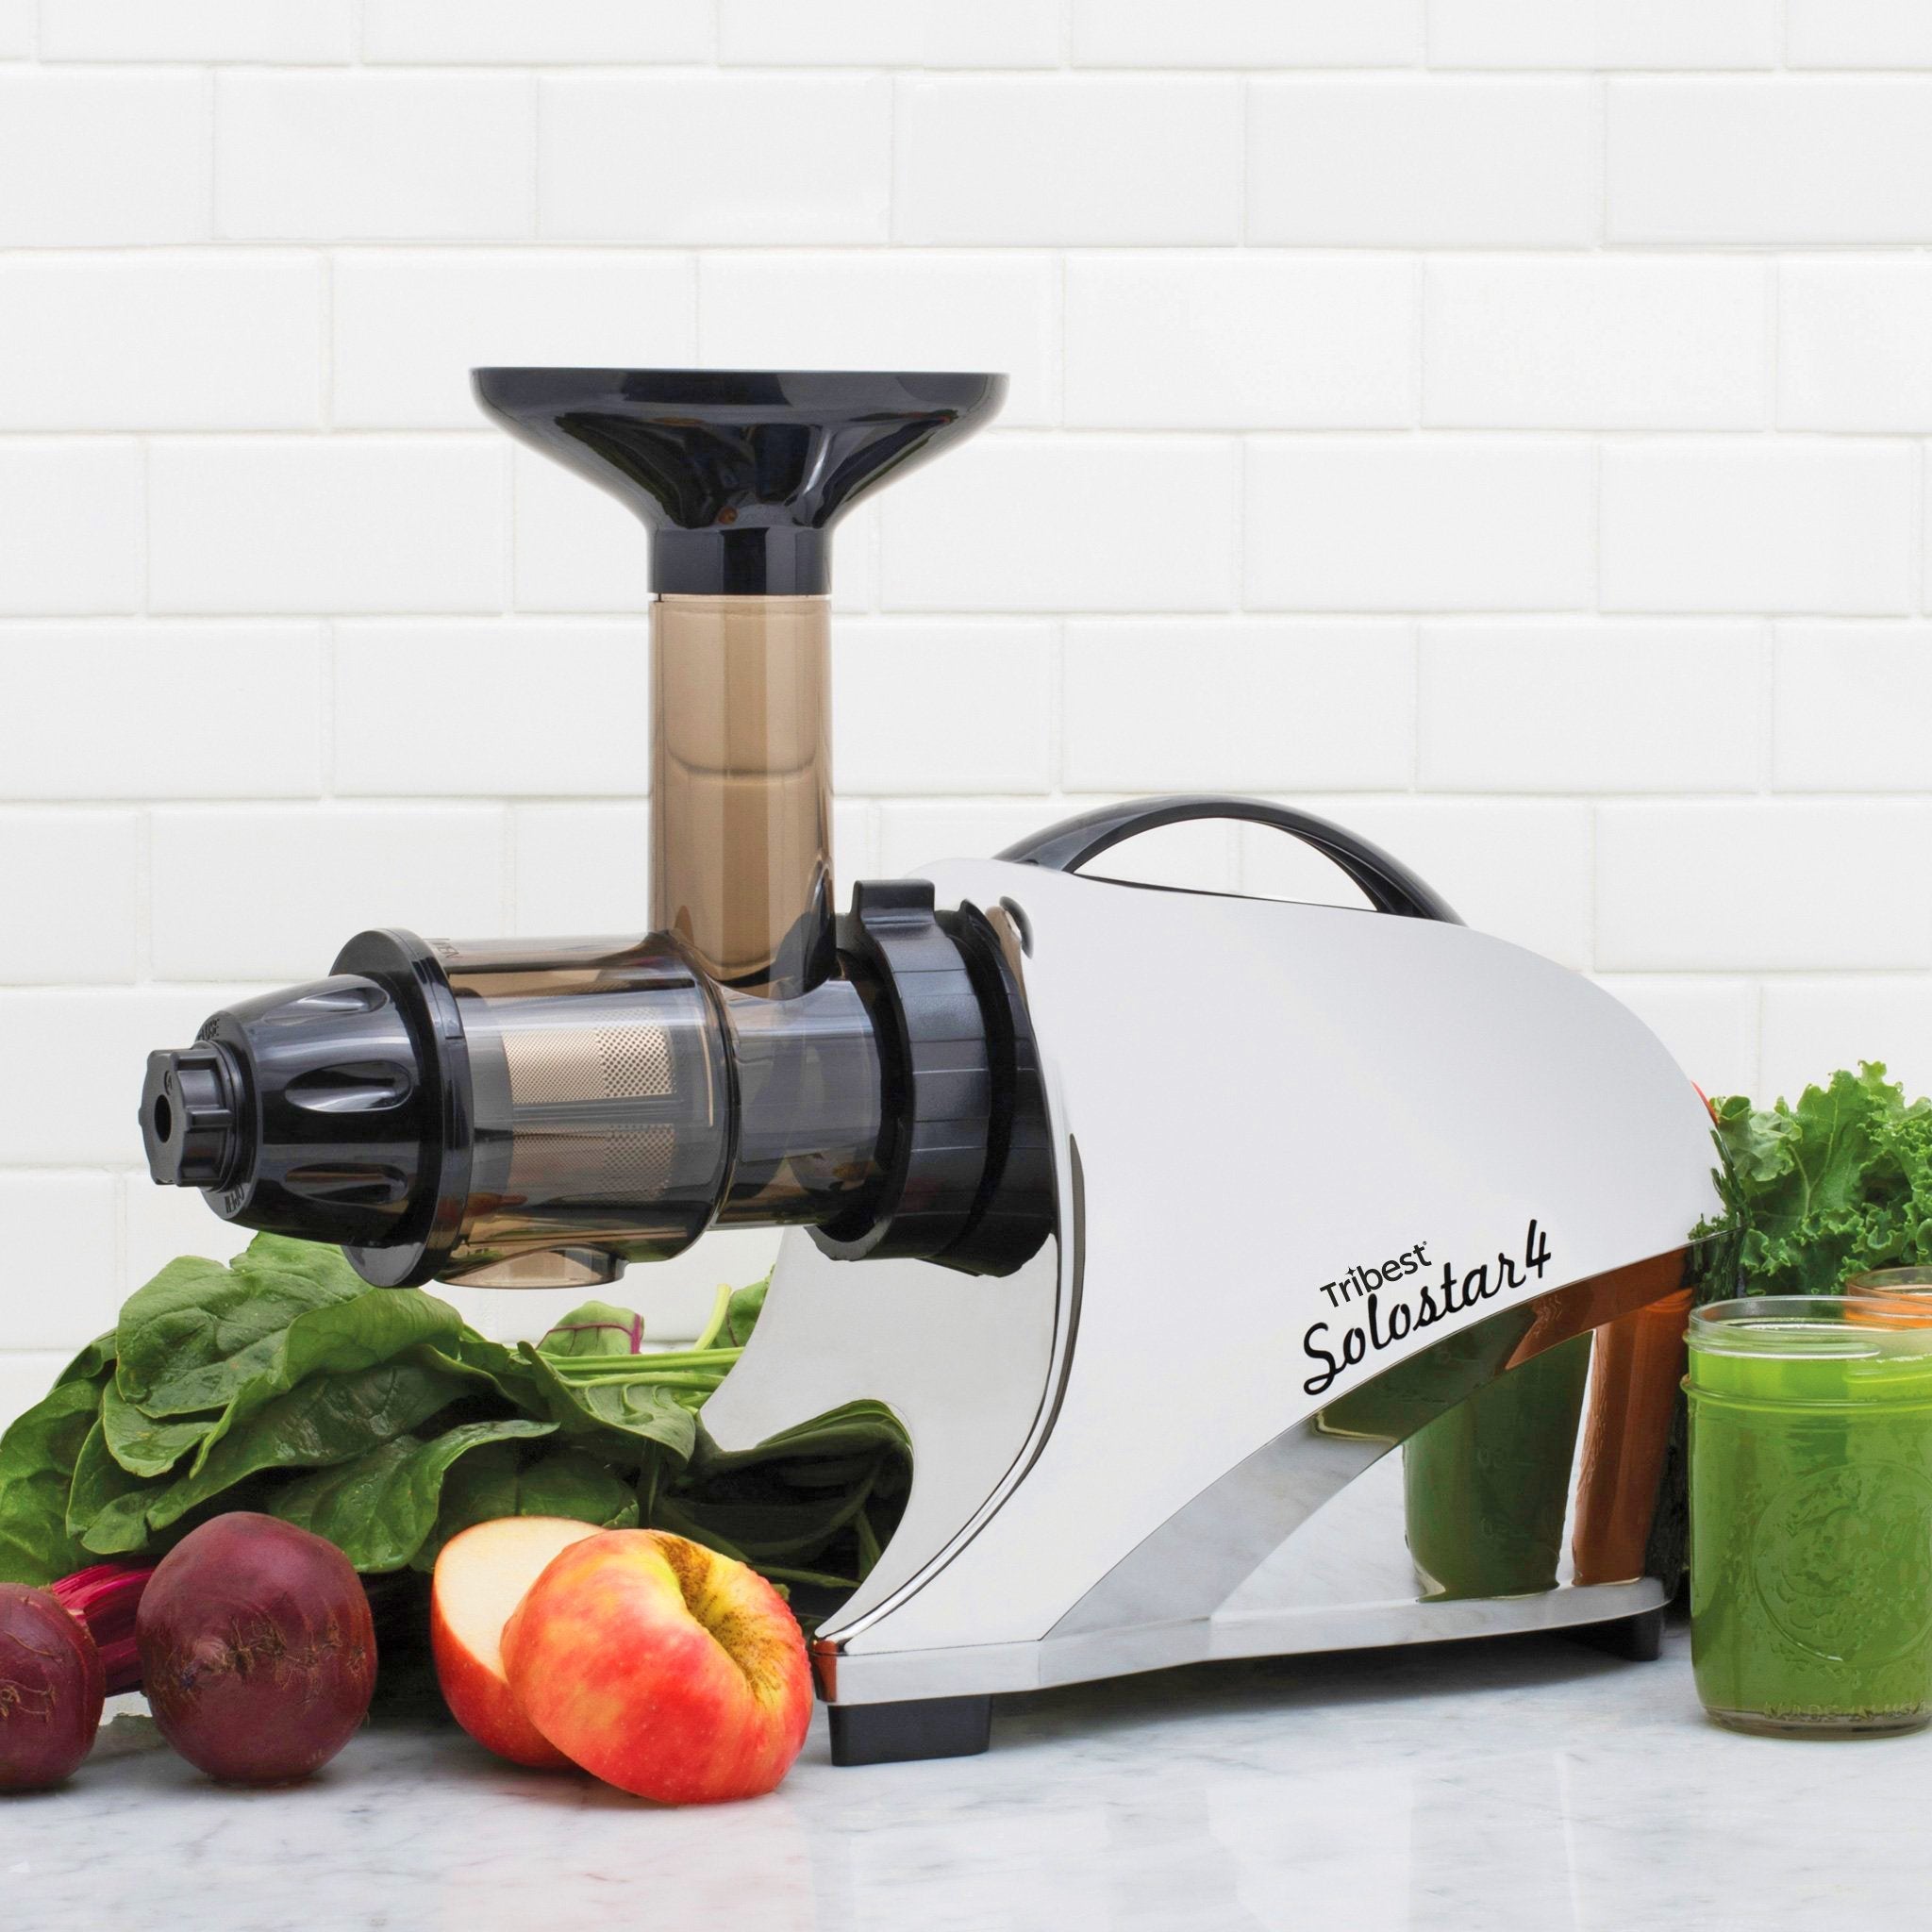 Solostar® 4 Horizontal Slow Masticating Juicer in Chome SS4-4250 - Tribest